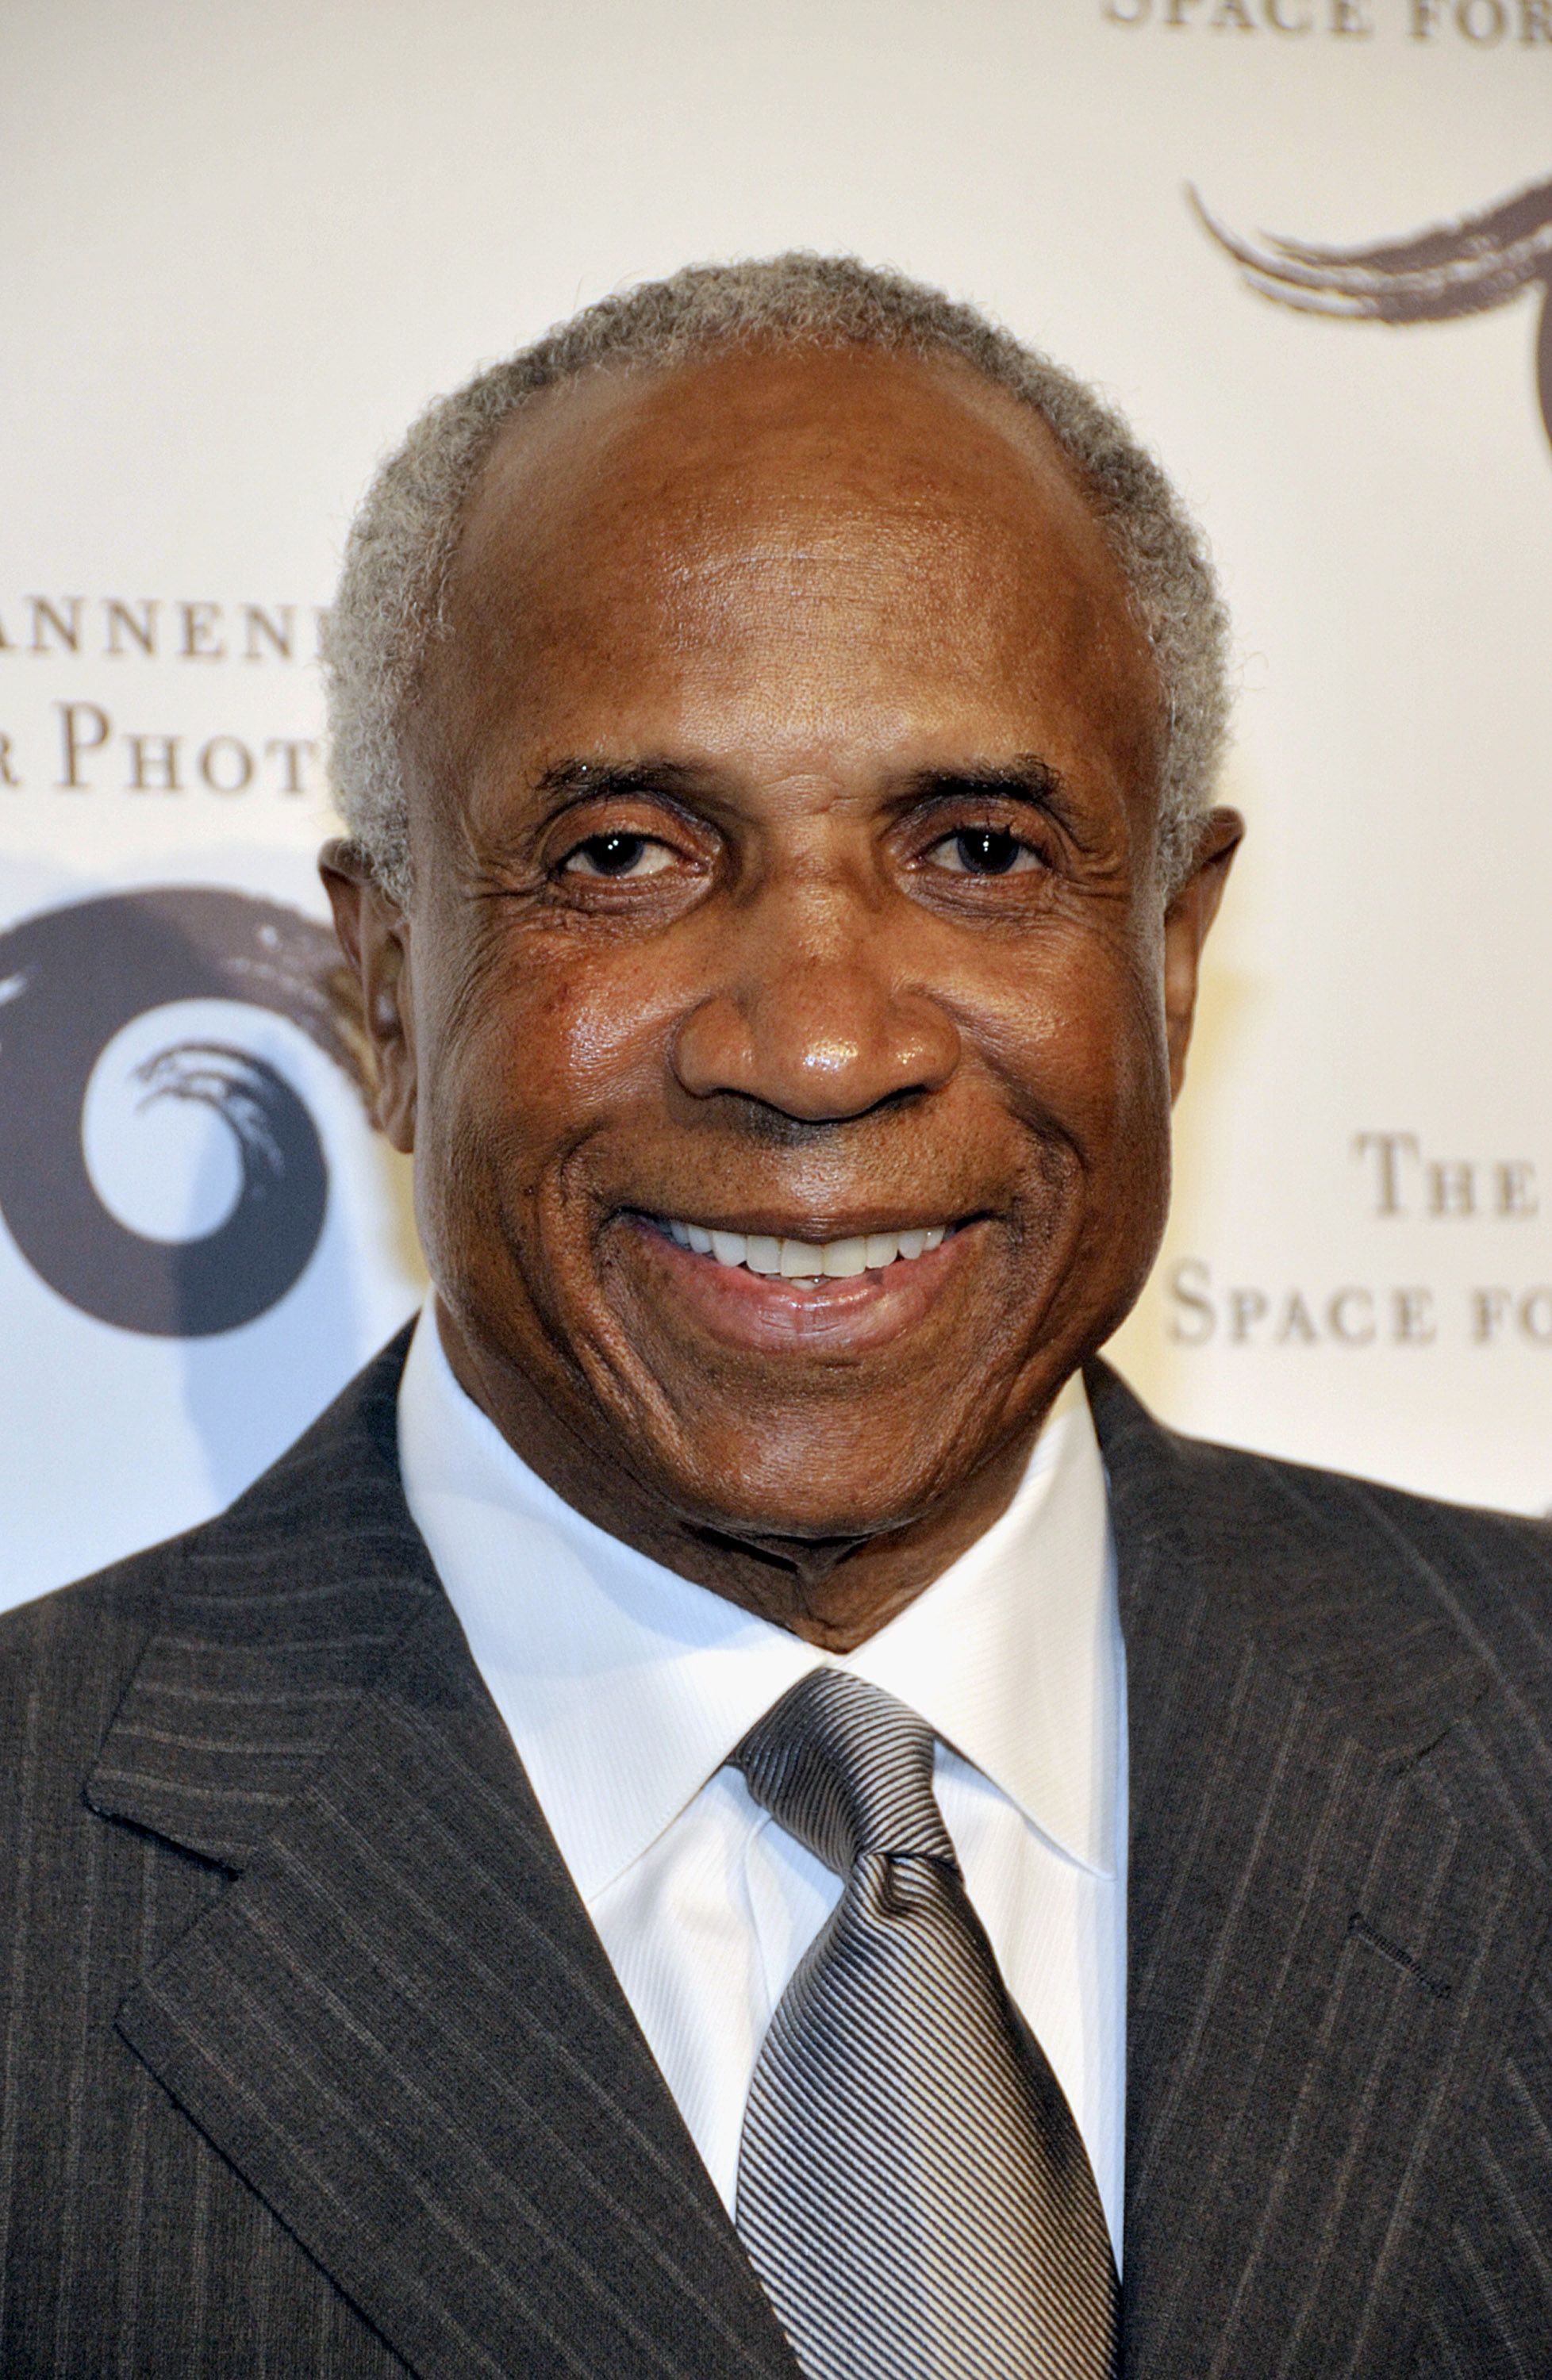 CENTURY CITY, CA - NOVEMBER 13:  Former Major League Baseball Player Frank Robinson attends the opening of SPORT: Iooss & Leifer at the Annenberg Space For Photography on November 13, 2009 in Century City, California.  (Photo by John M. Heller/Getty Image